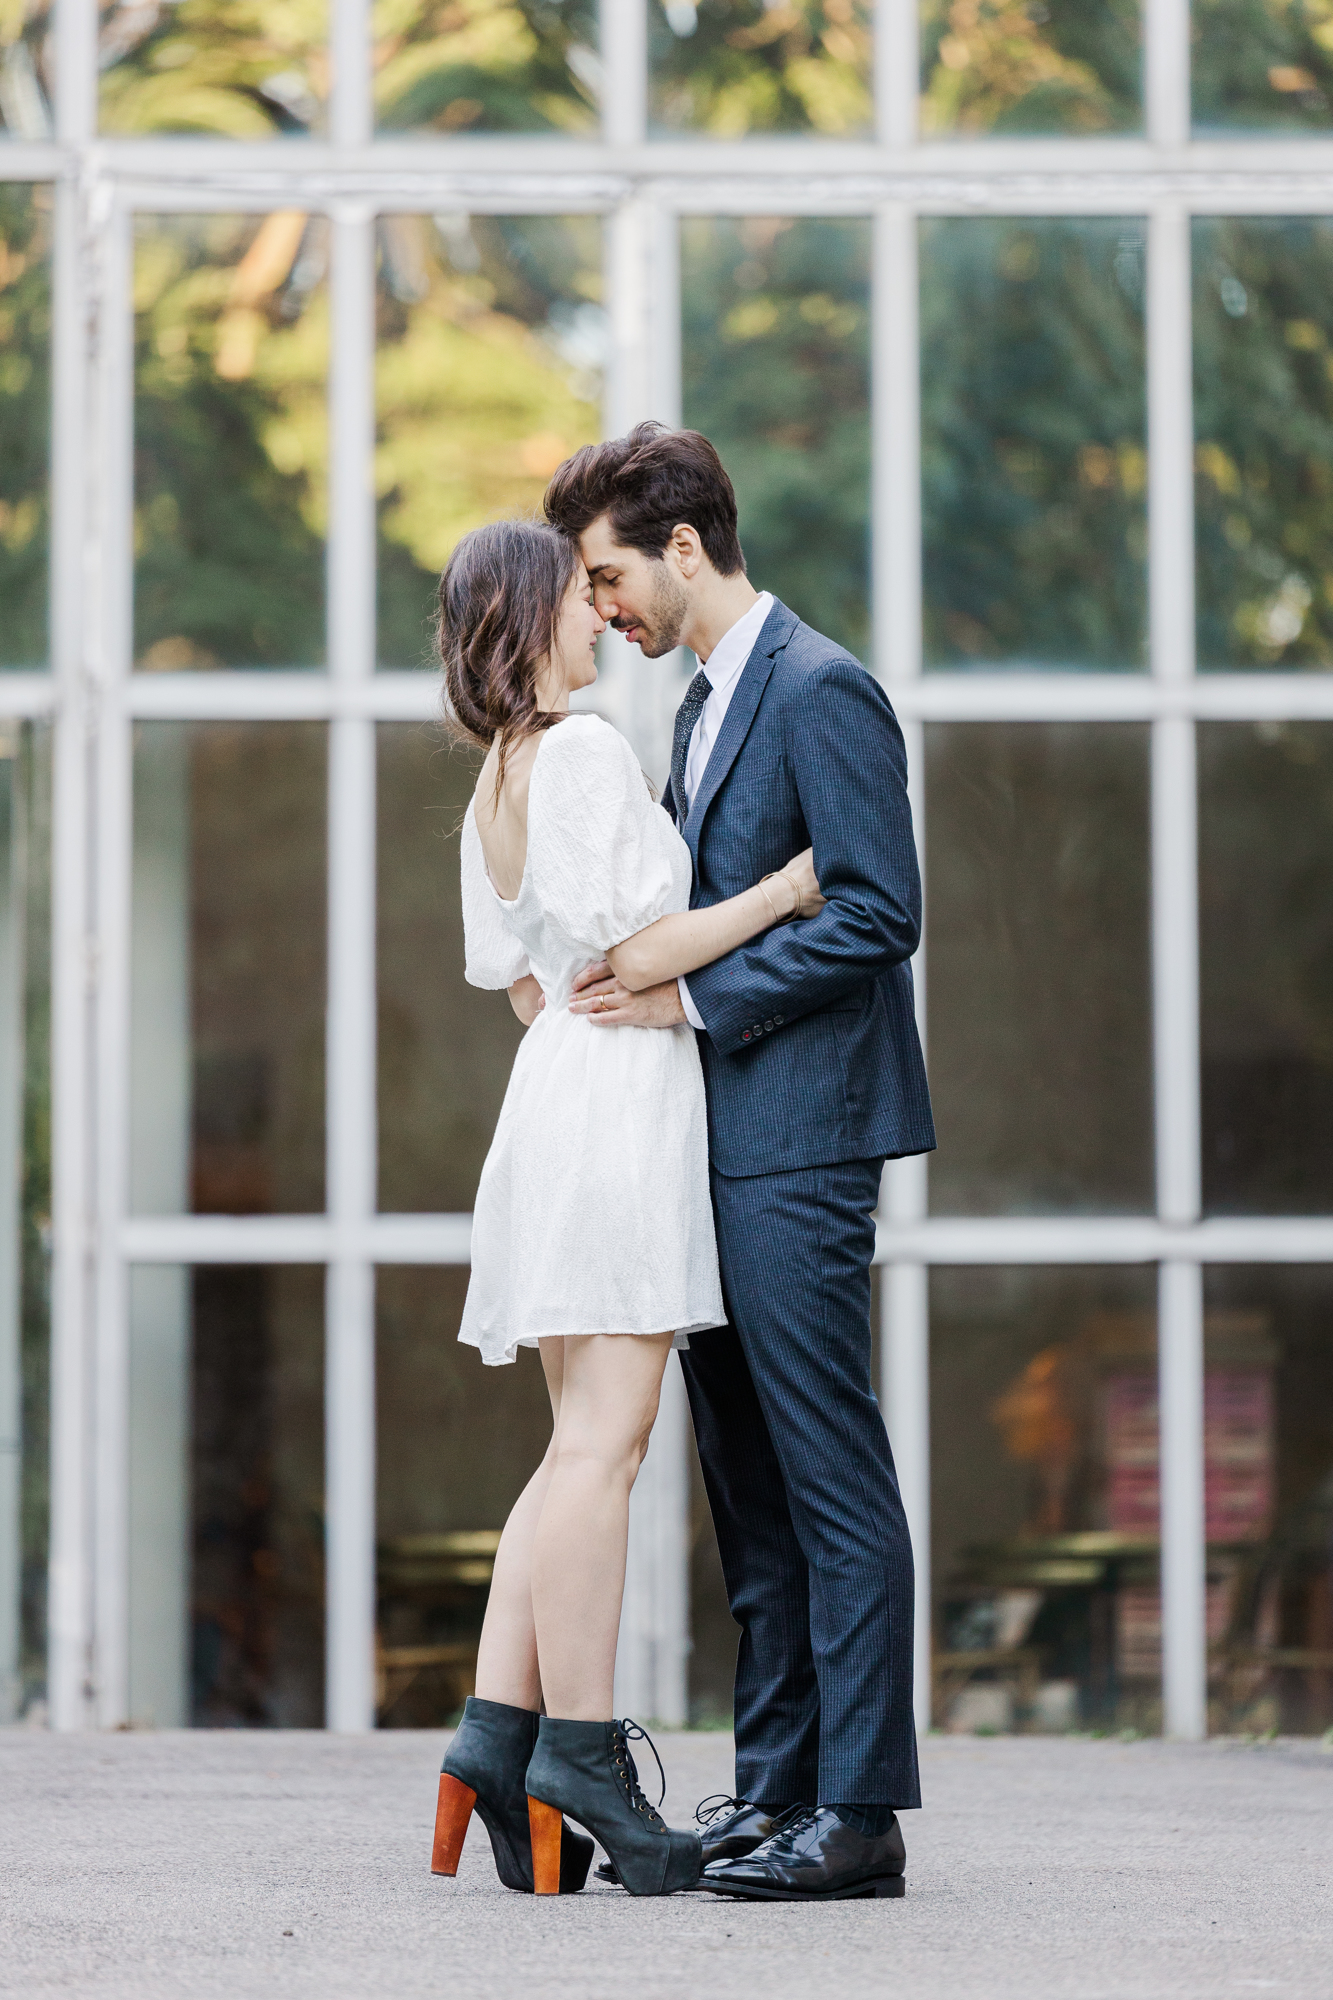 Fabulous Central Park Engagement Photos in NYC